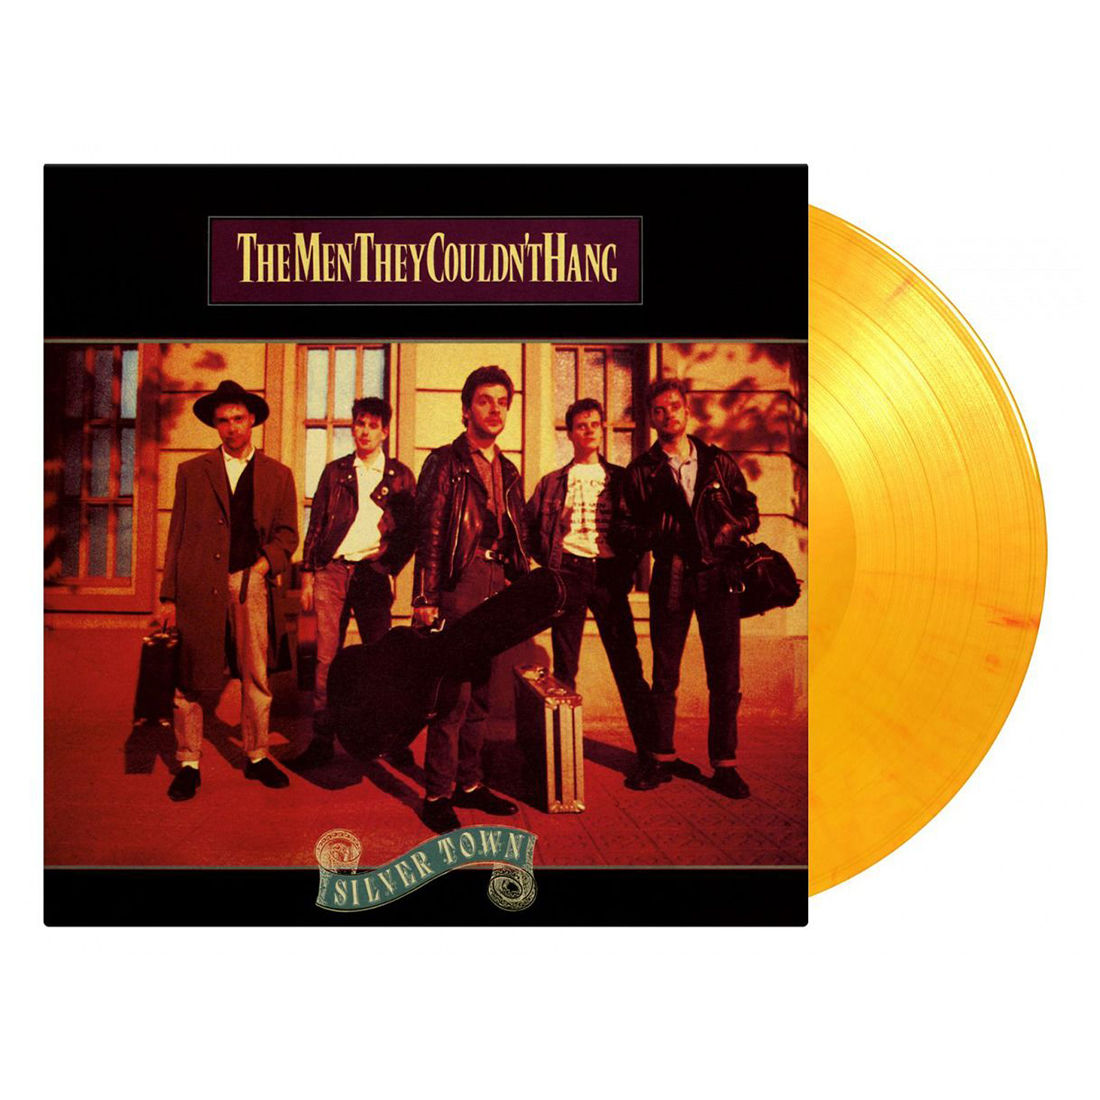 The Men They Couldn't Hang - Silver Town: Limited Edition Flaming Coloured Vinyl LP